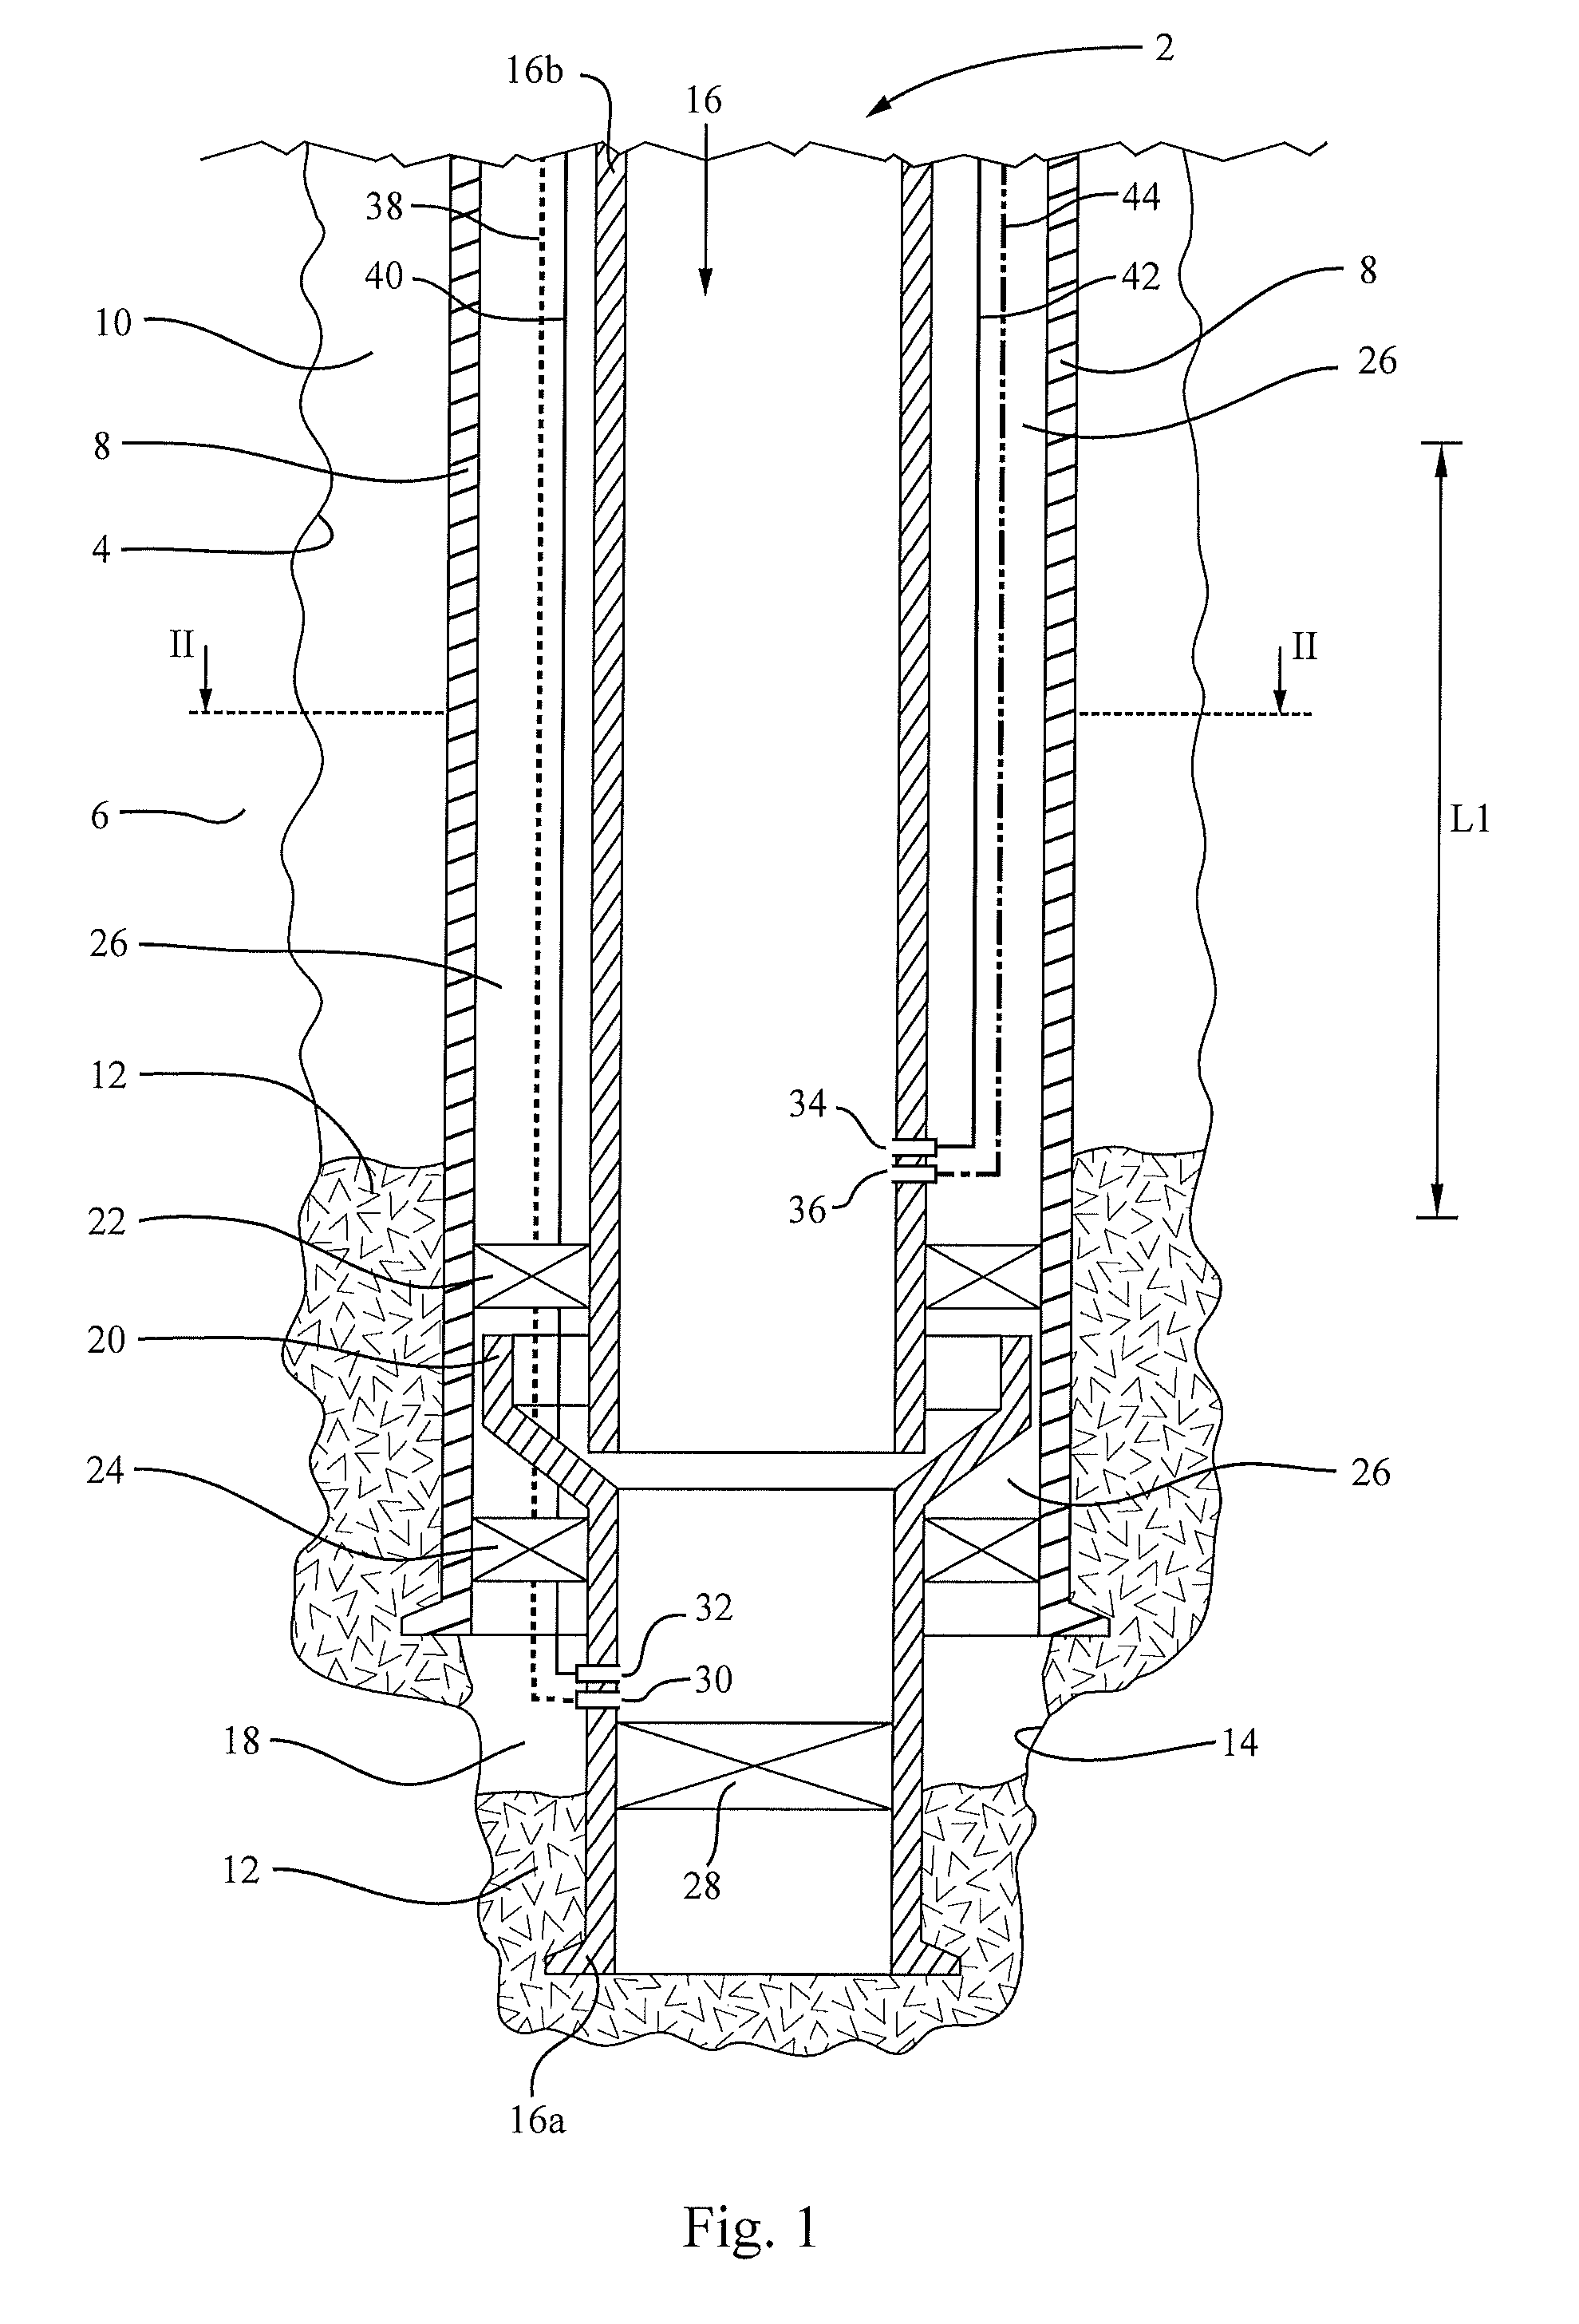 Method for Downhole Cutting of At Least One Line Disposed Outside and Along a Pipe String in a Well, and Without Simultaneously Severing the Pipe String